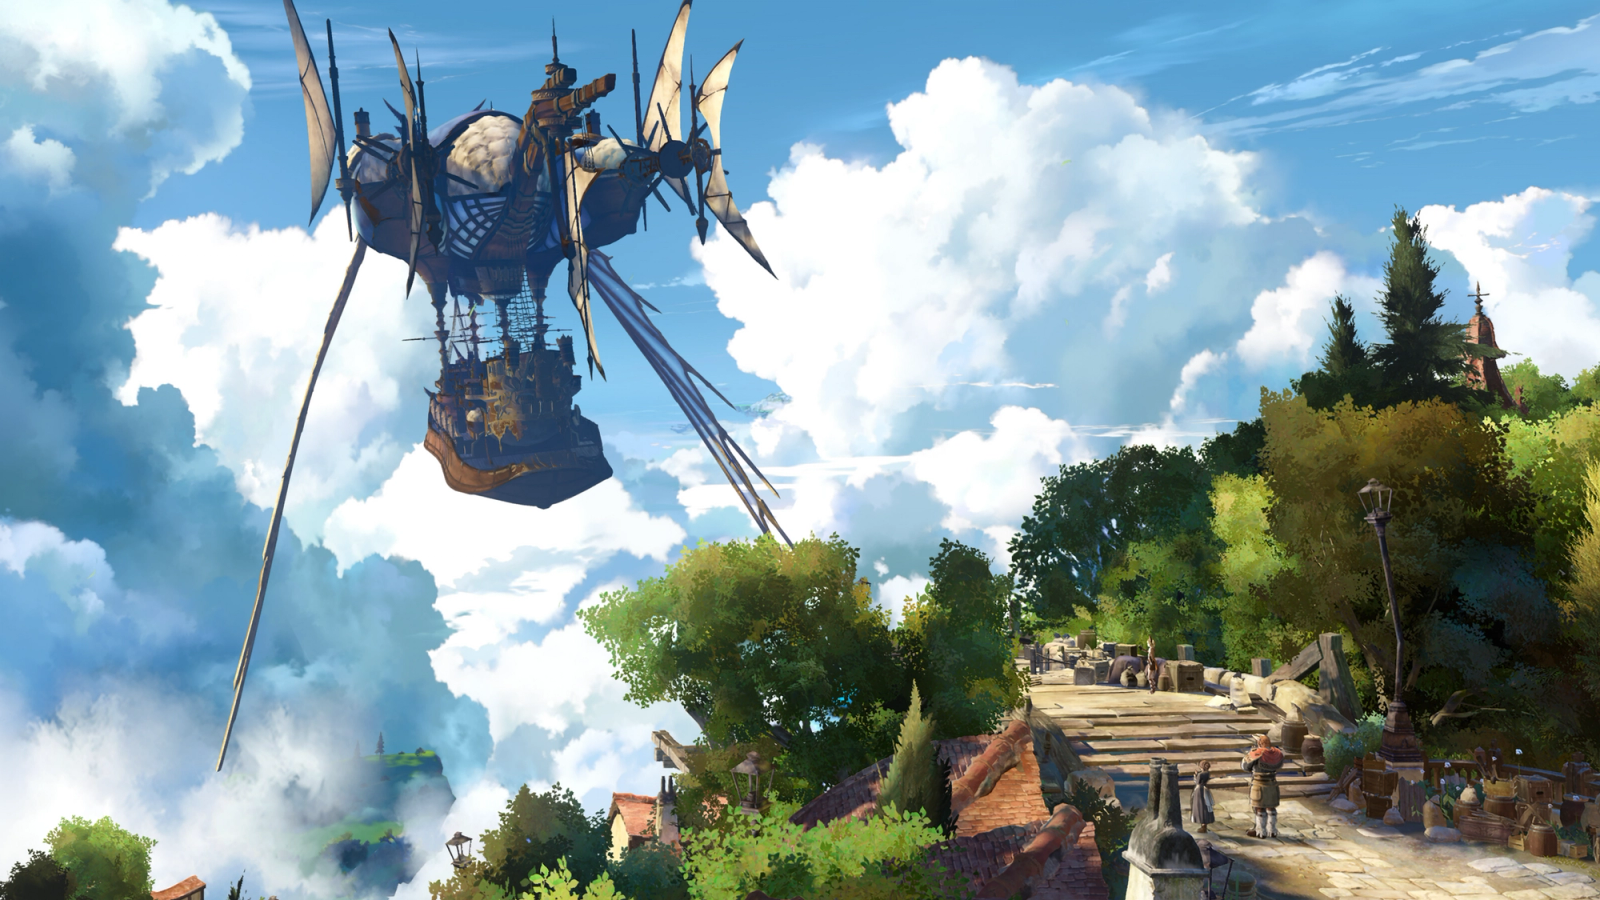 granblue fantasy relink airship taking off into blue skies with lush greenery underneath